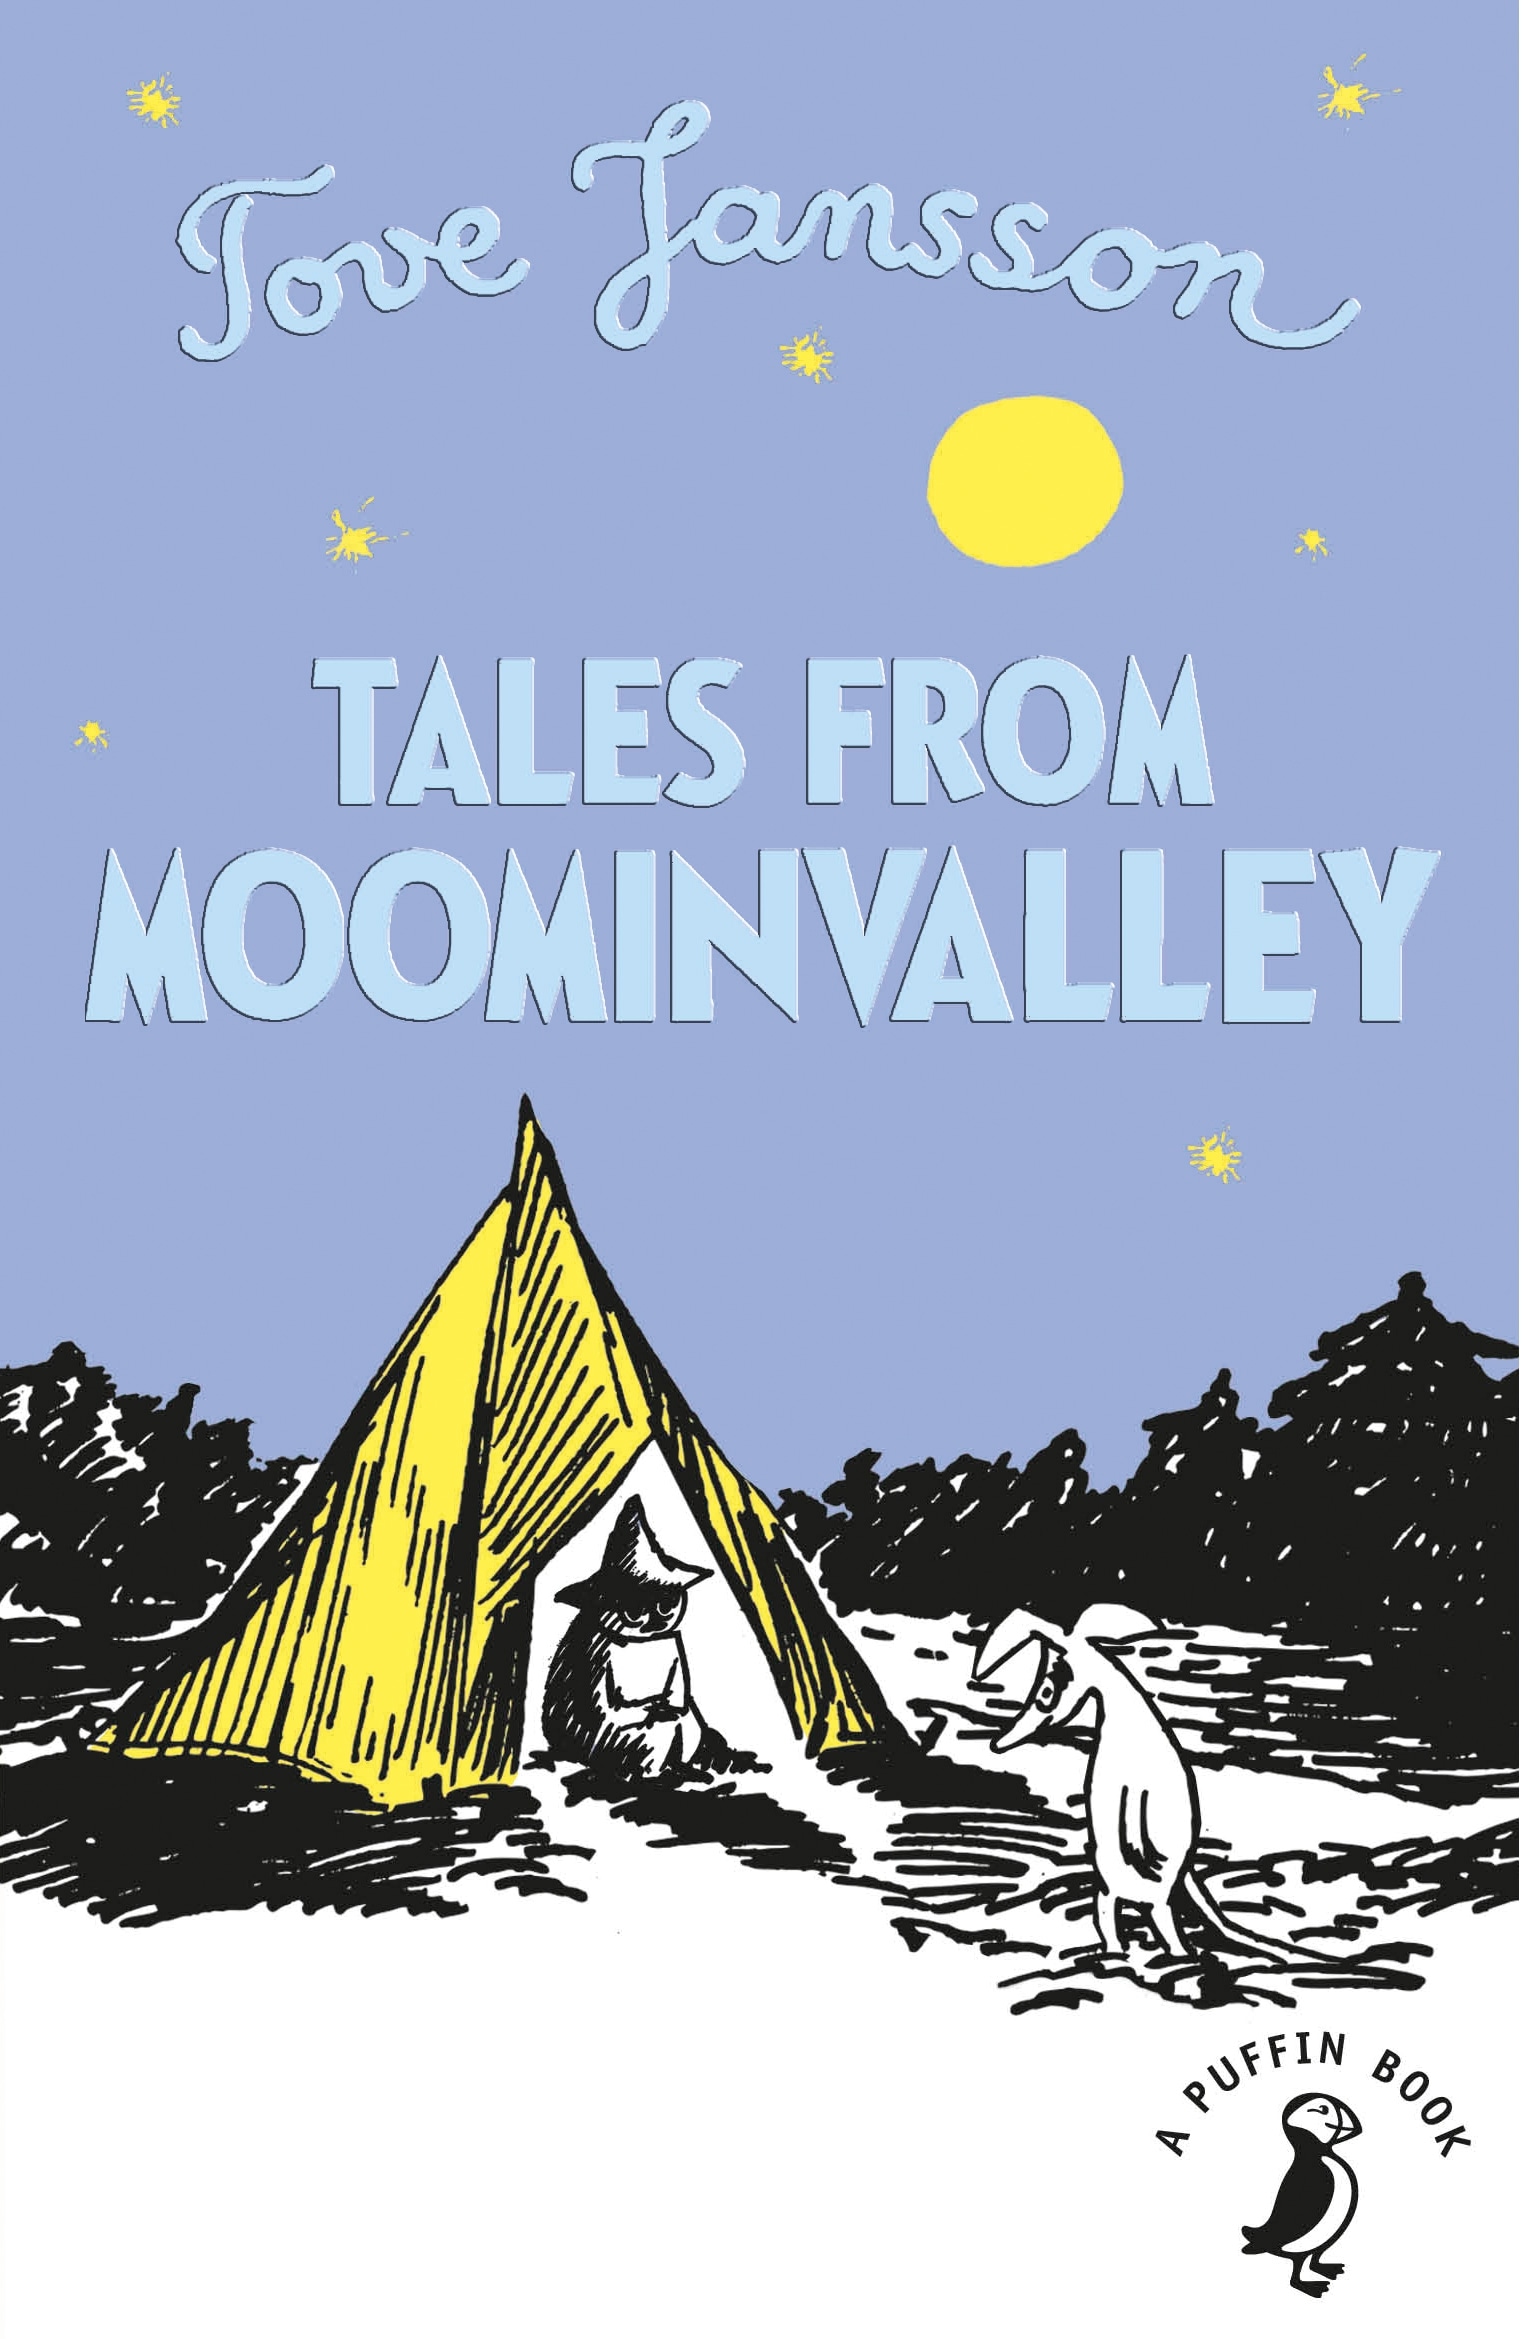 Book “Tales from Moominvalley” by Tove Jansson — February 7, 2019